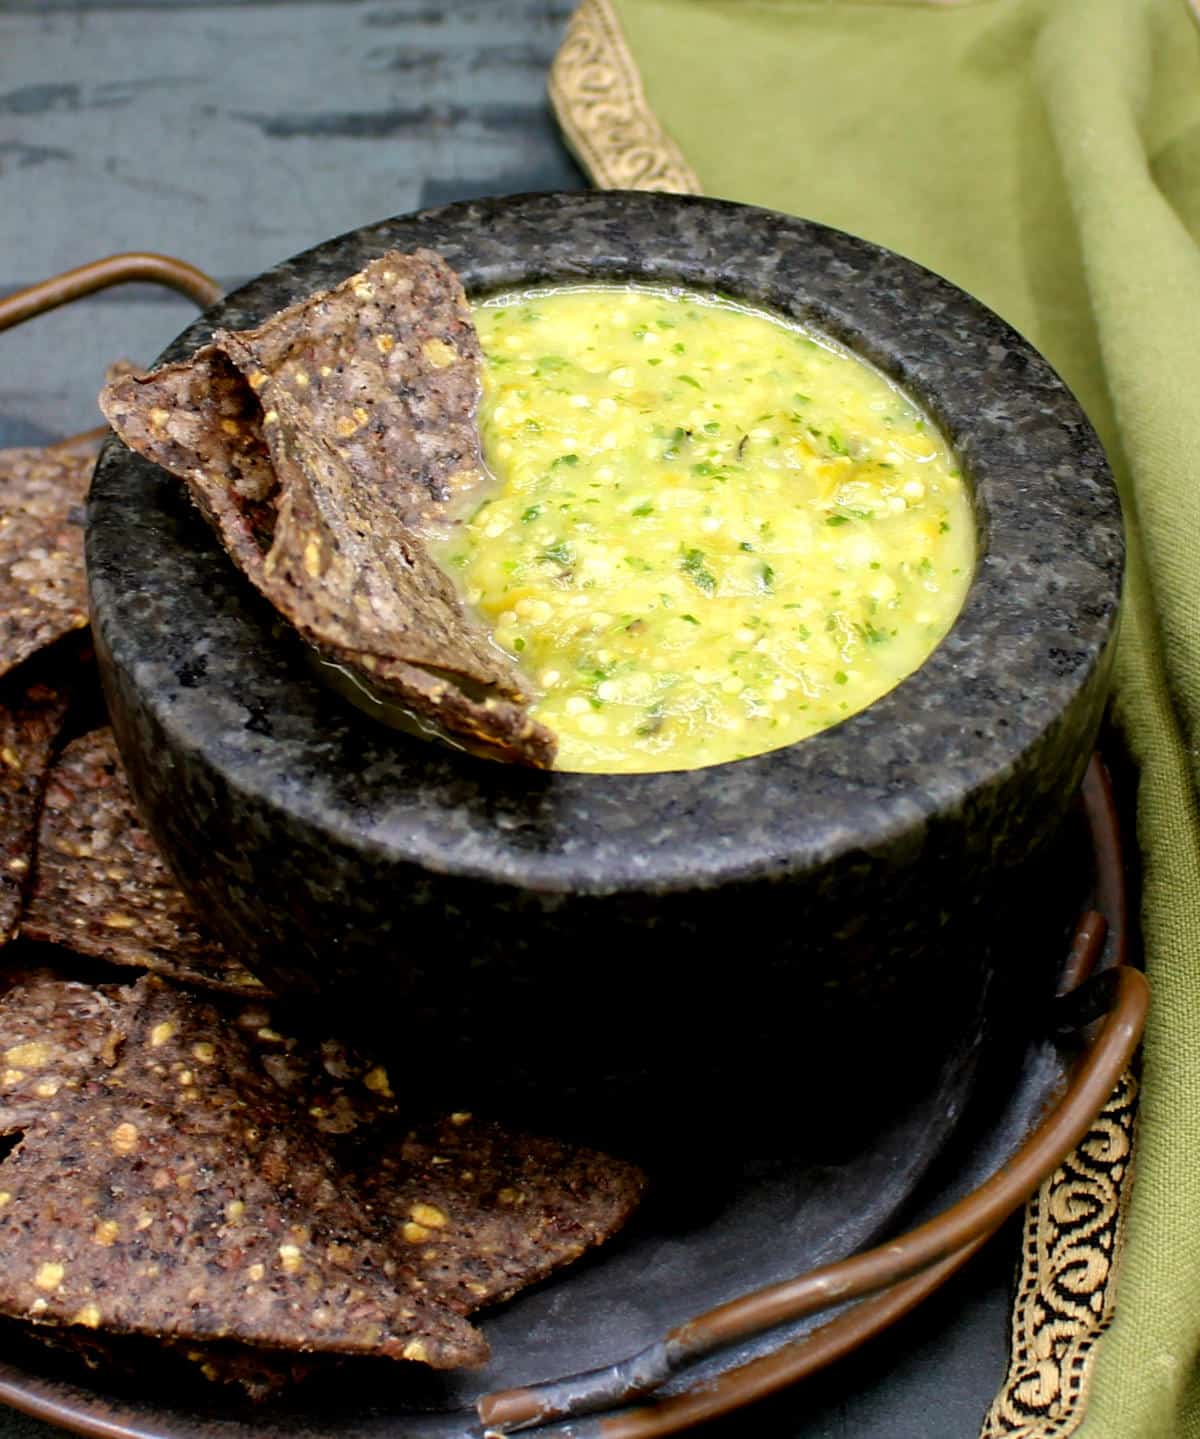 Salsa verde in stone molcajete bowl with tortilla chips.